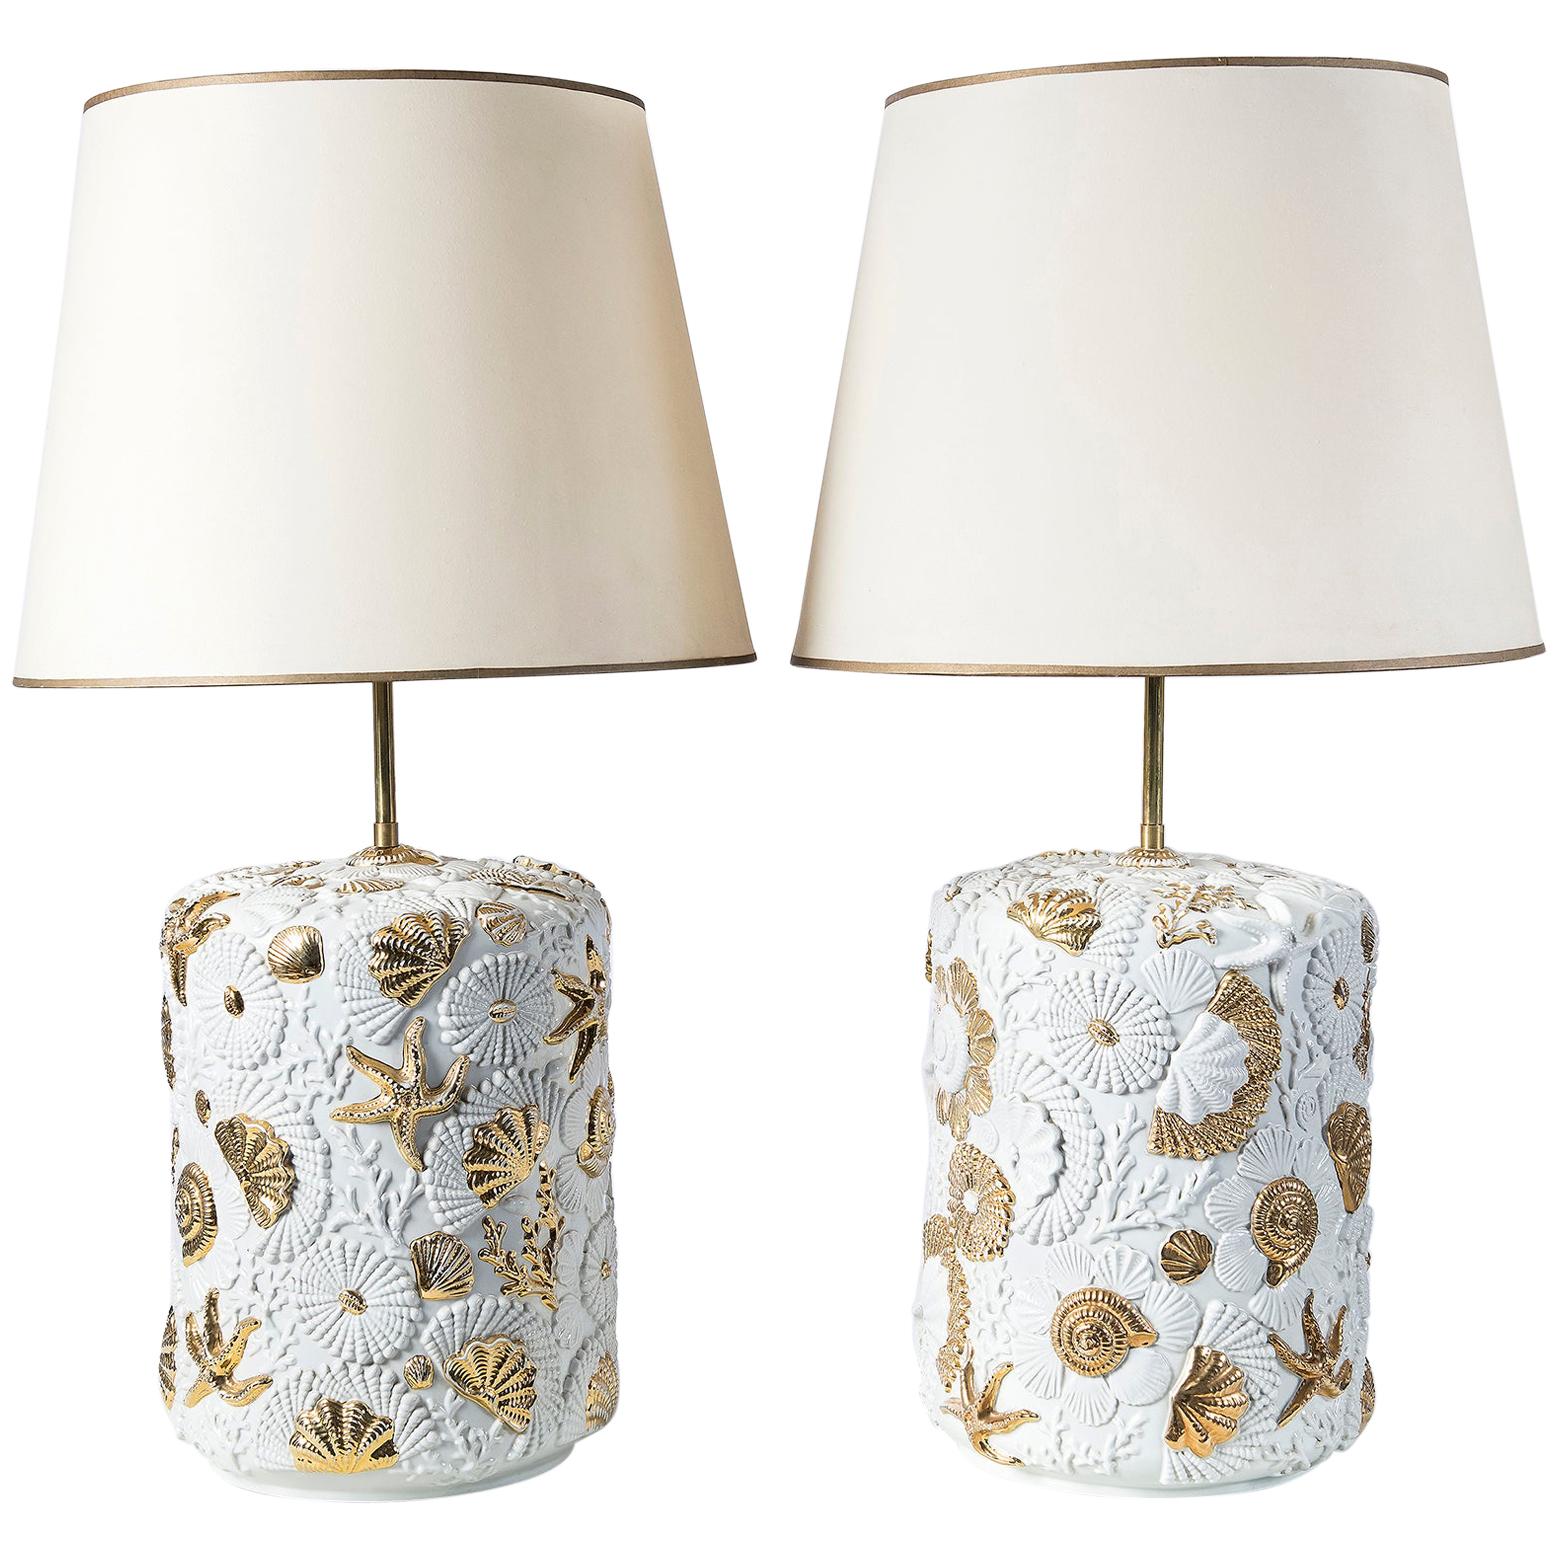 Pair of Porcelain Table Lamps, Porcellane San Marco Manufacture, Italy